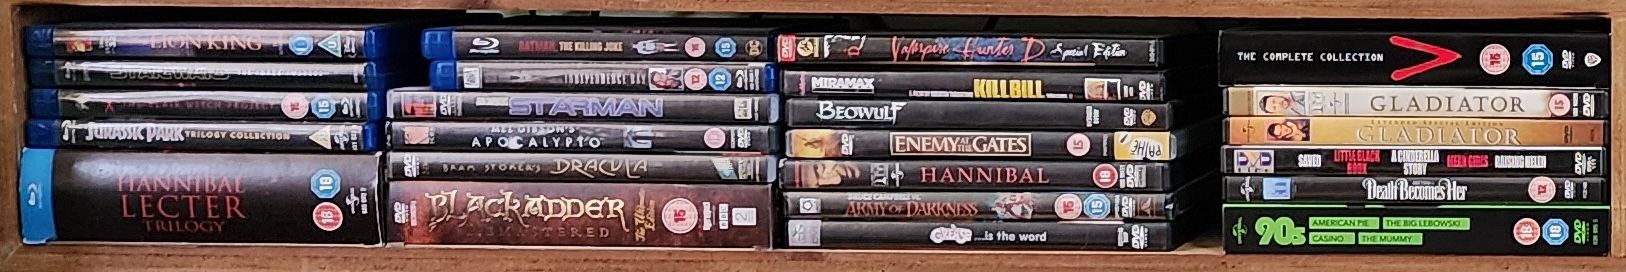 A small movie collection comprised of DVDs and Blu Ray discs.